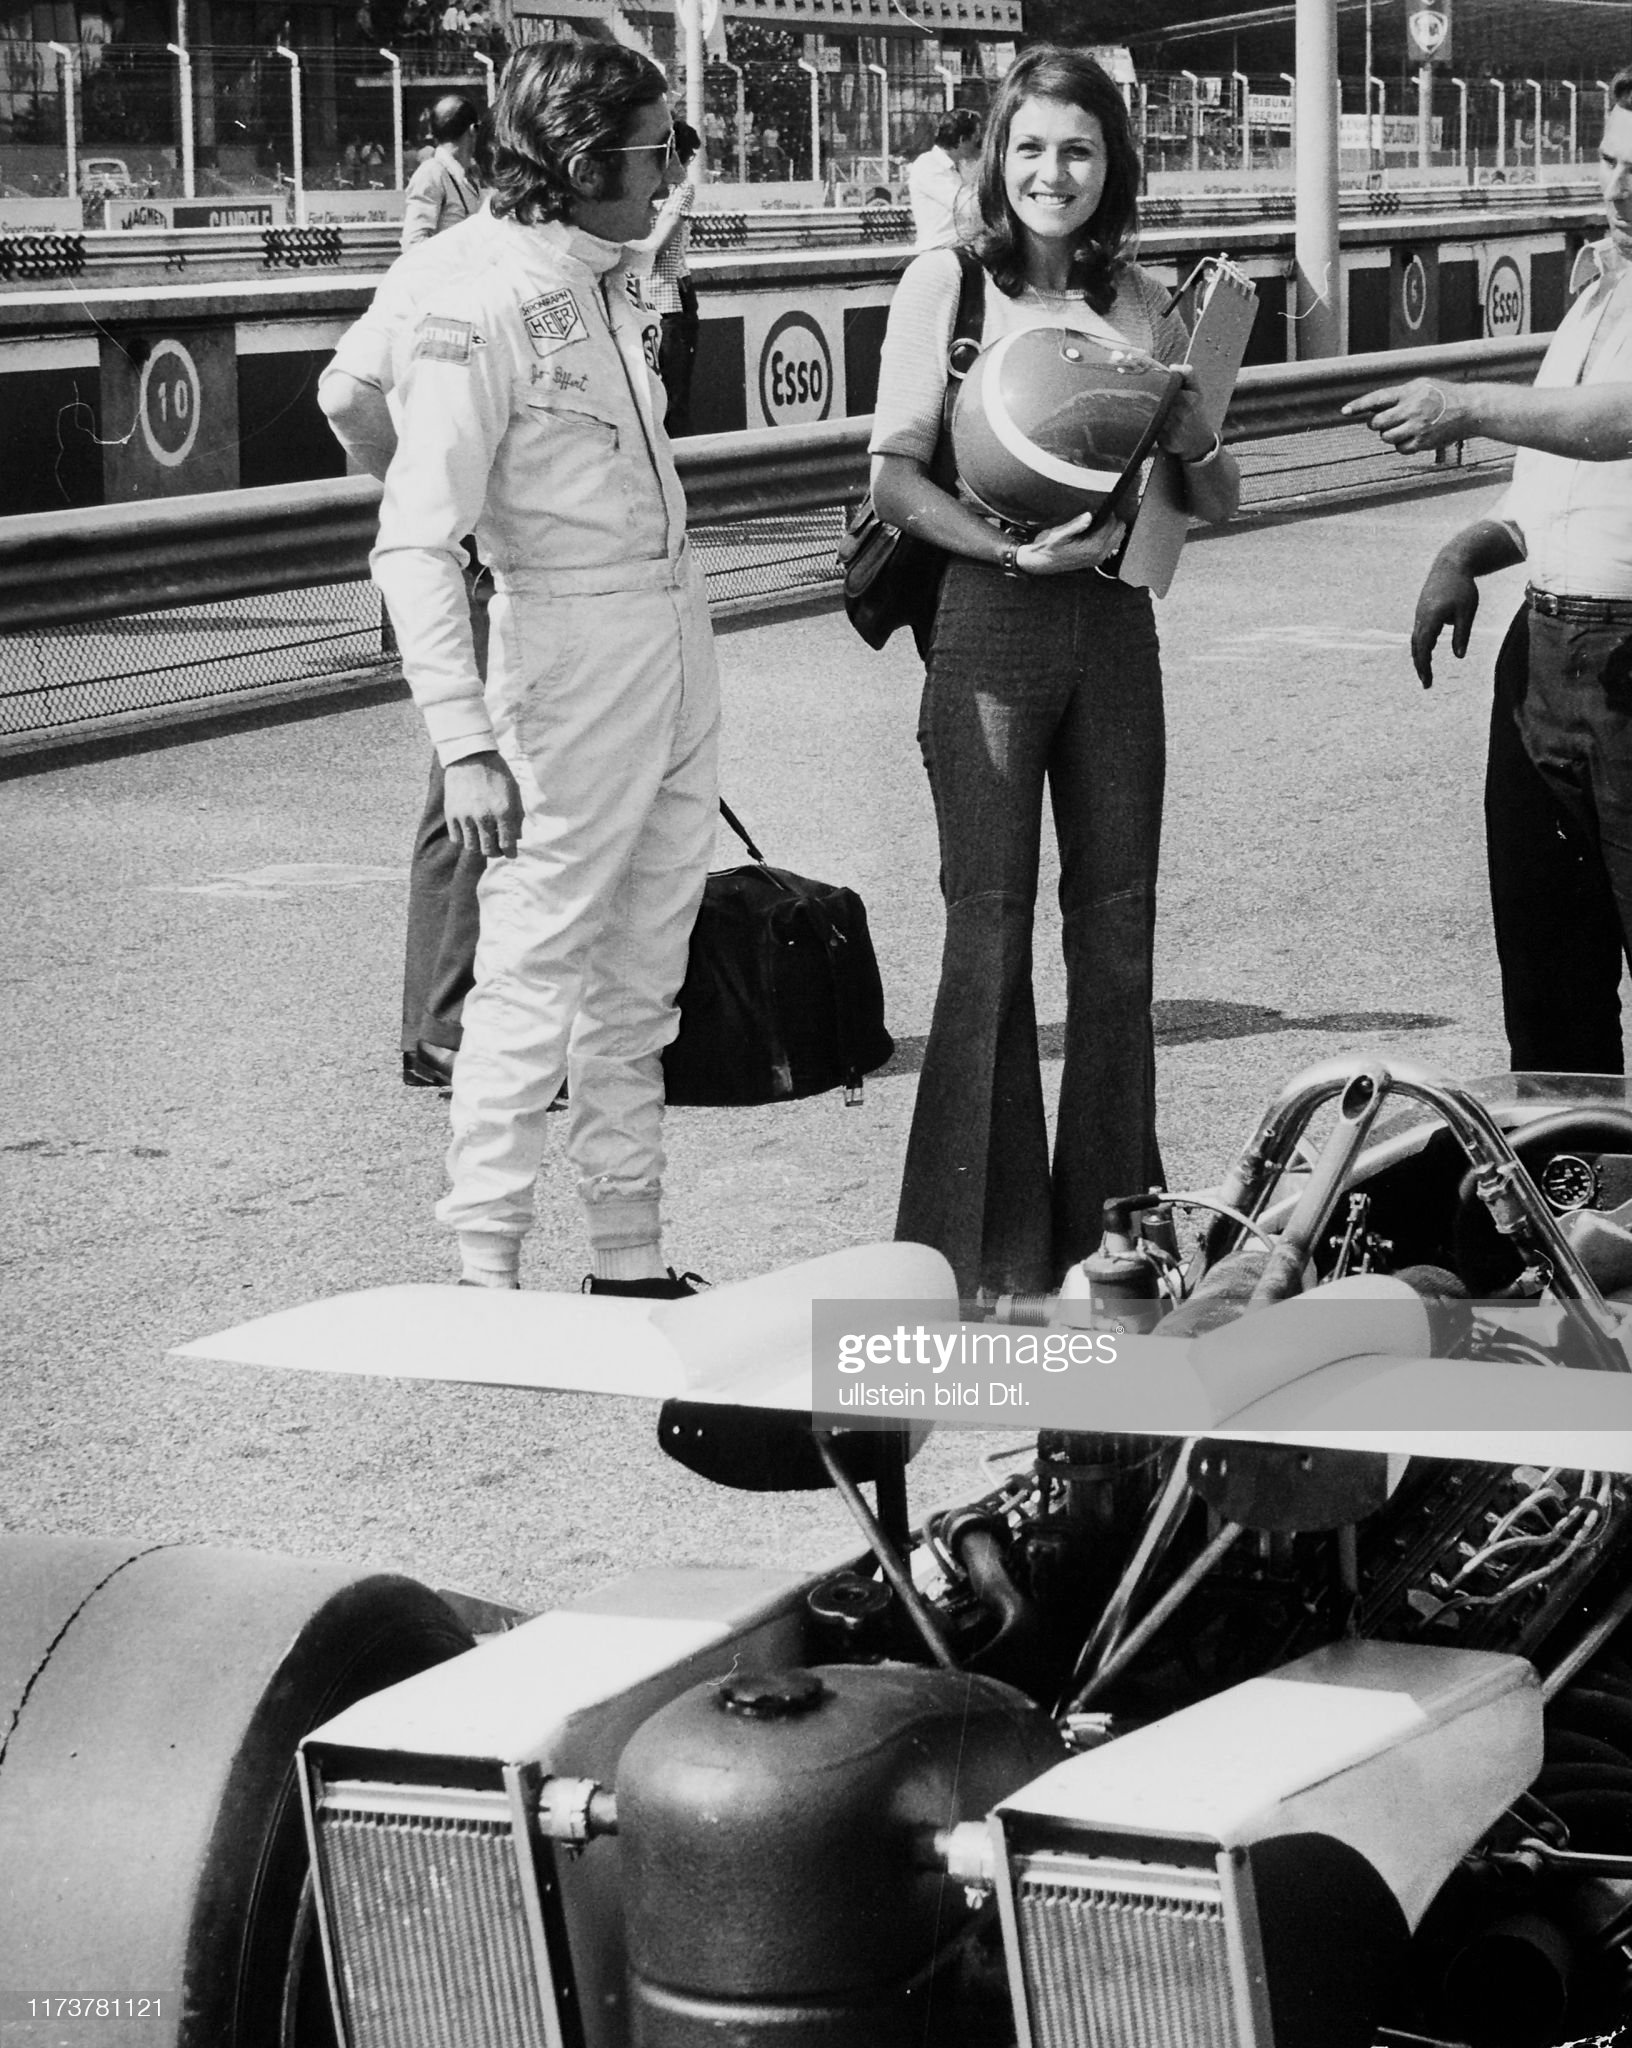 Jo Siffert and his wife Simone in Monza on August 04, 1971. 